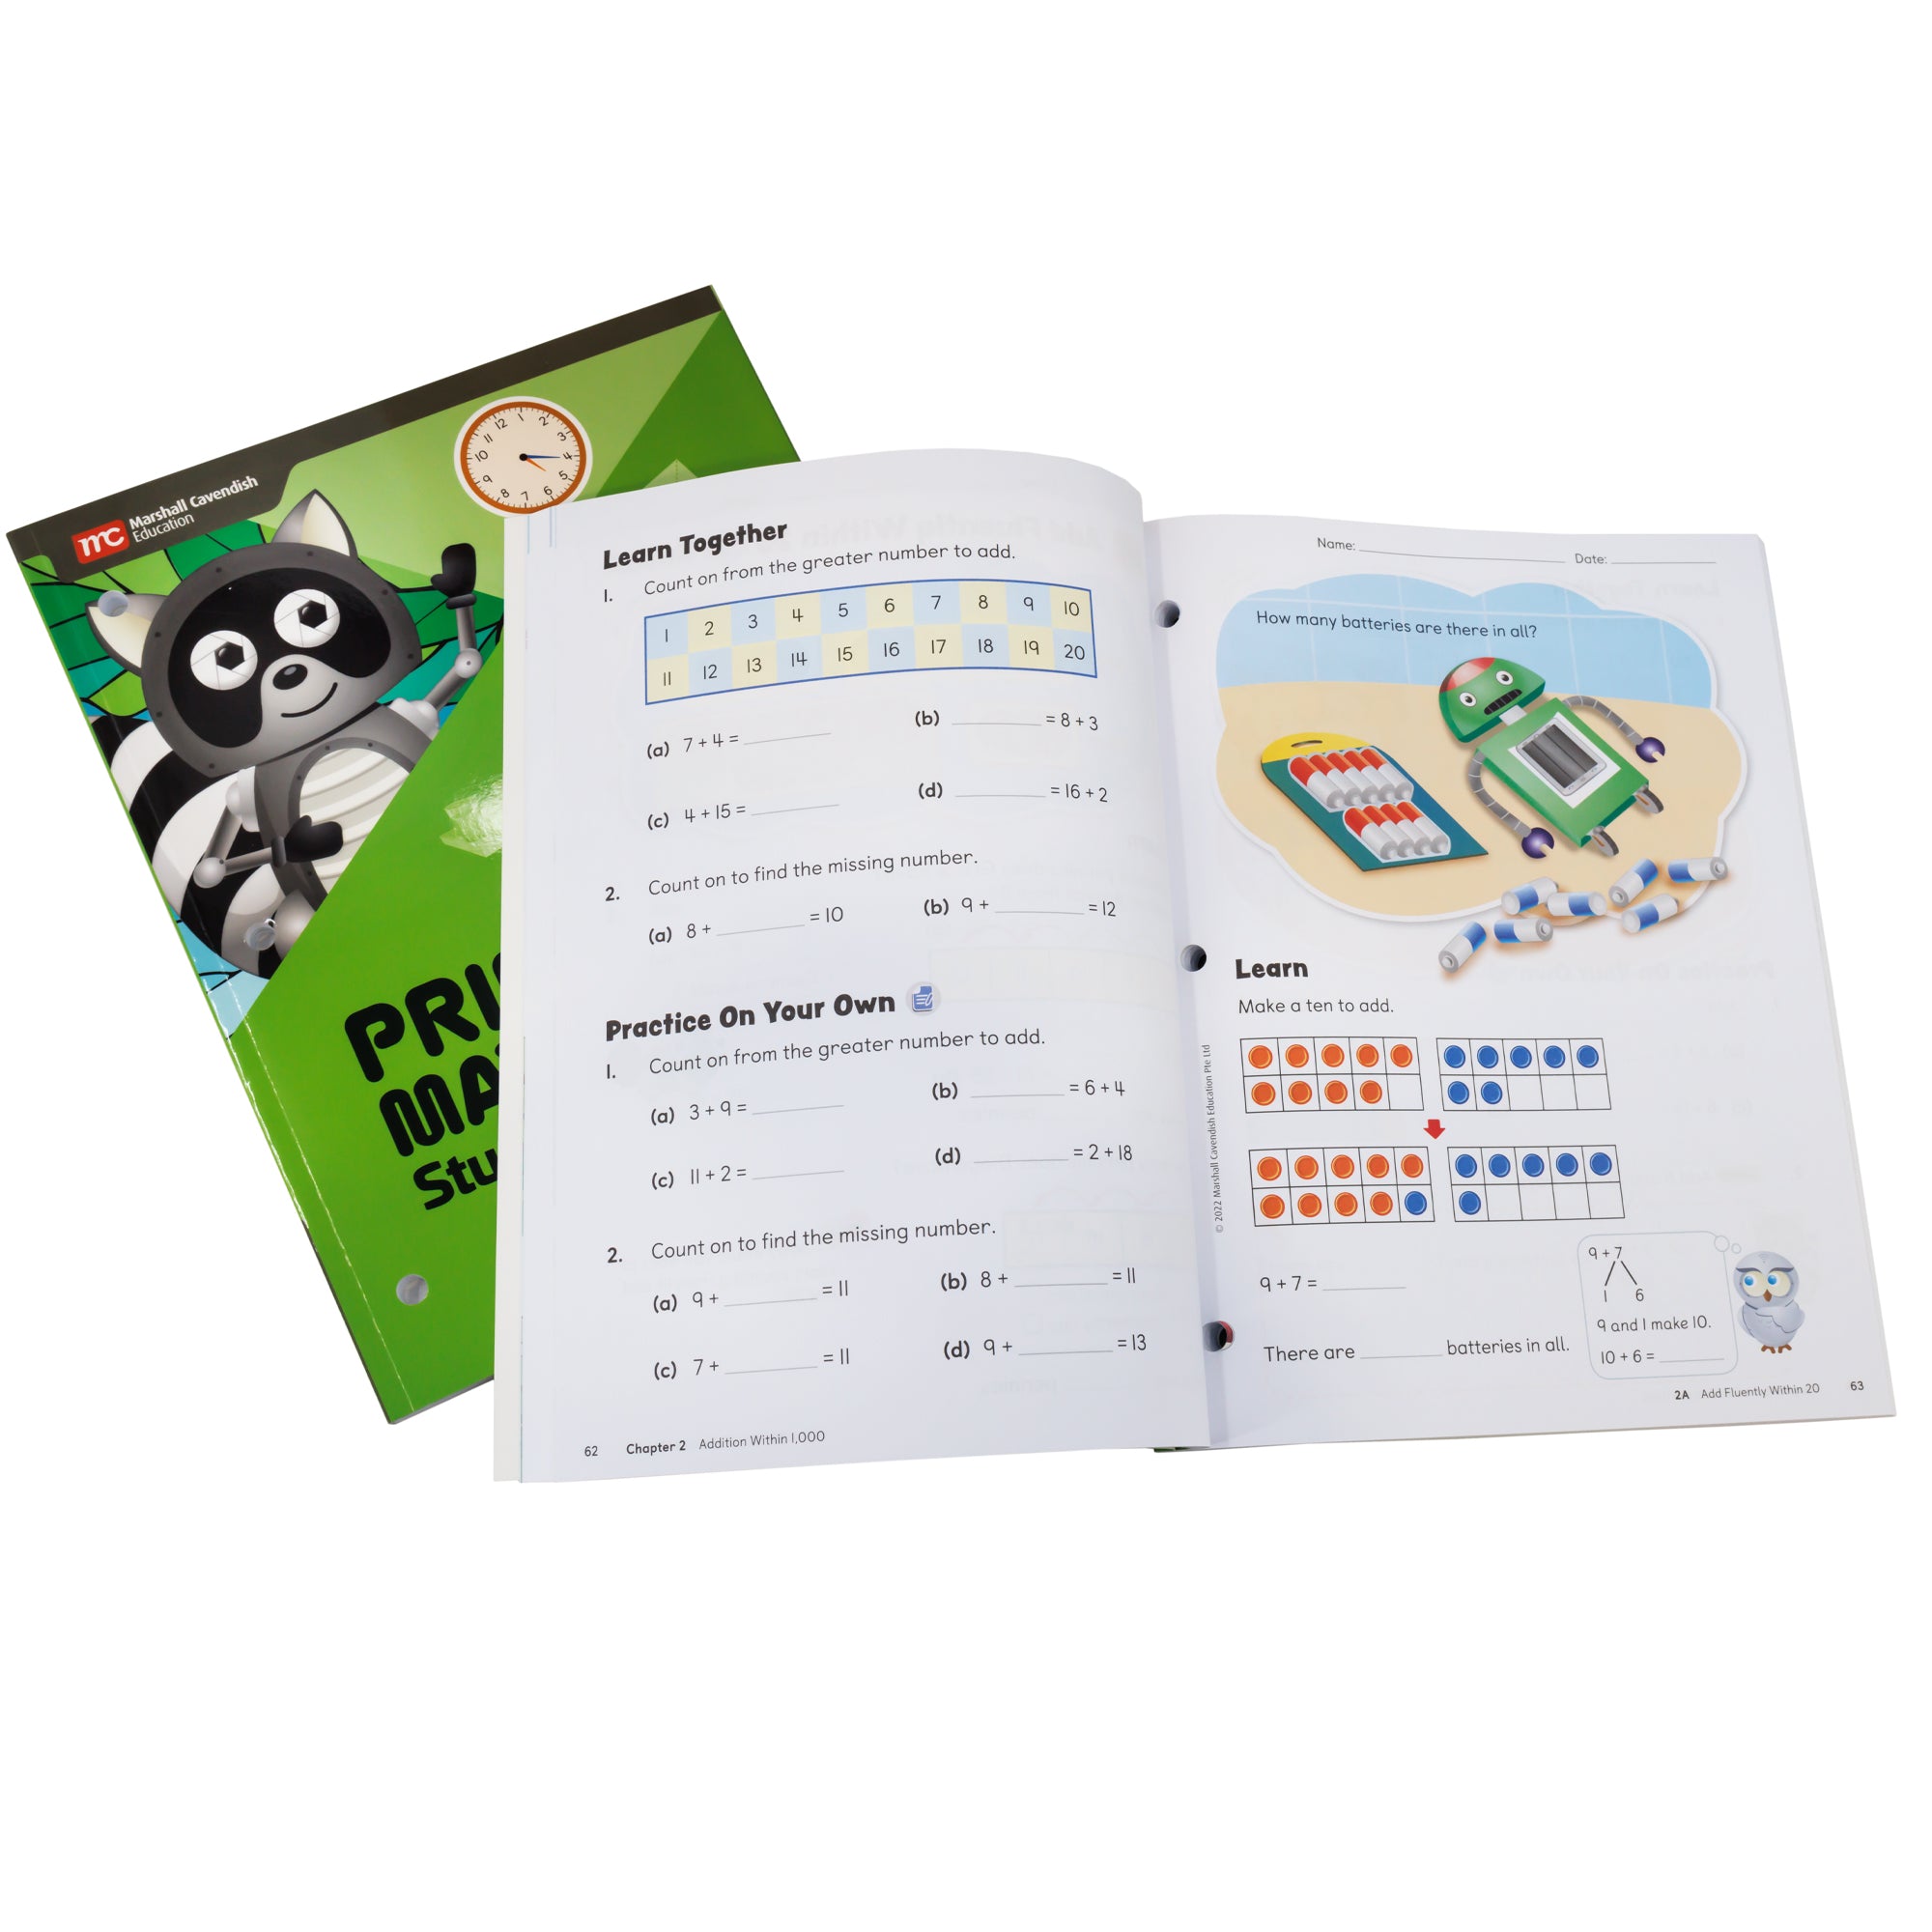 Singapore Primary Math second grade books. On top is an open book showing math problems with an illustration of a robot on the right page. Under the open book and to the left is a closed book with a racoon and green background.